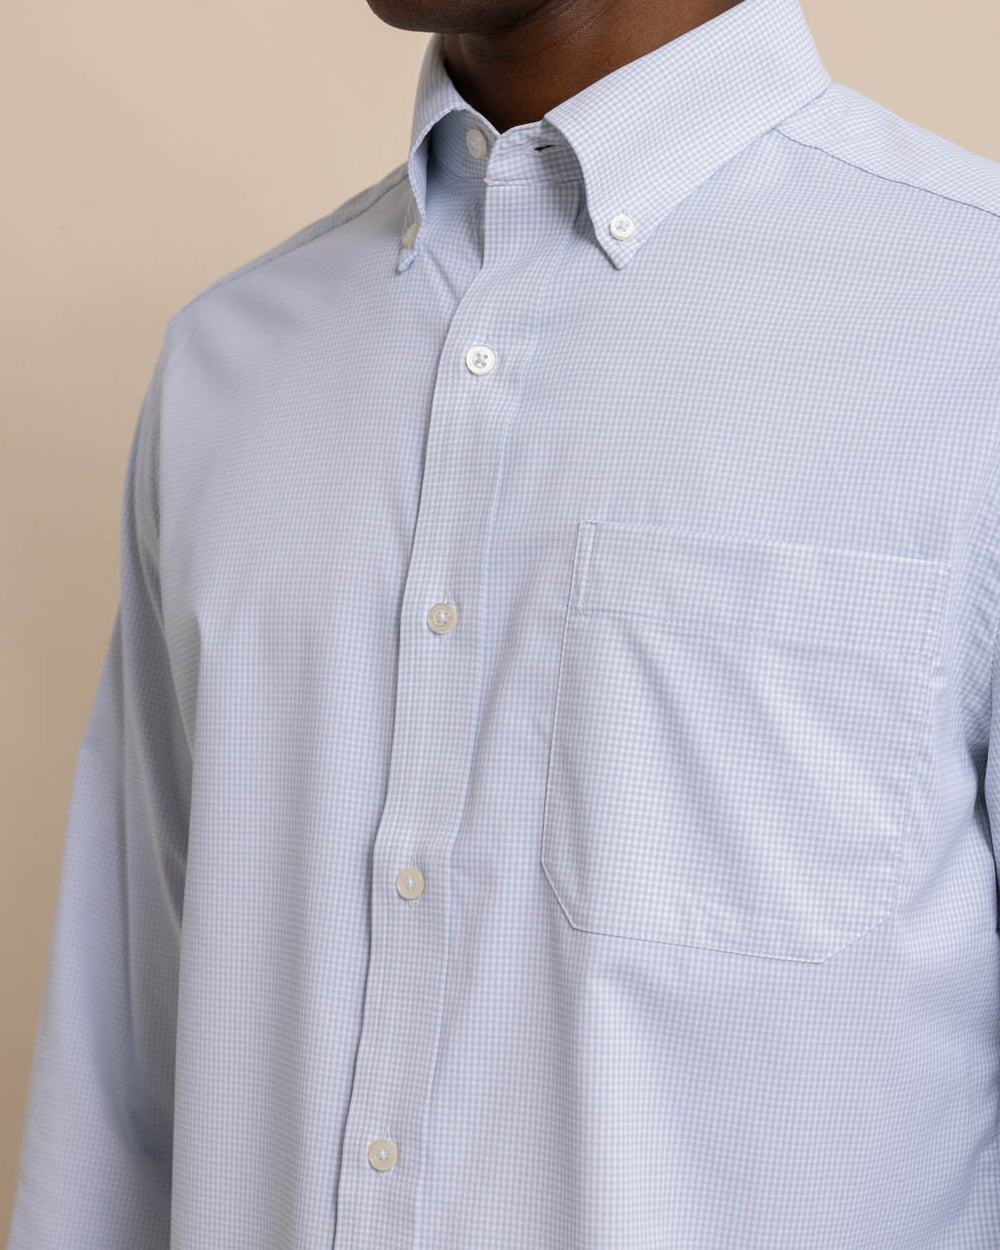 The detail view of the Team Colors Gingham Intercoastal Sport Shirt by Southern Tide - Slate Grey